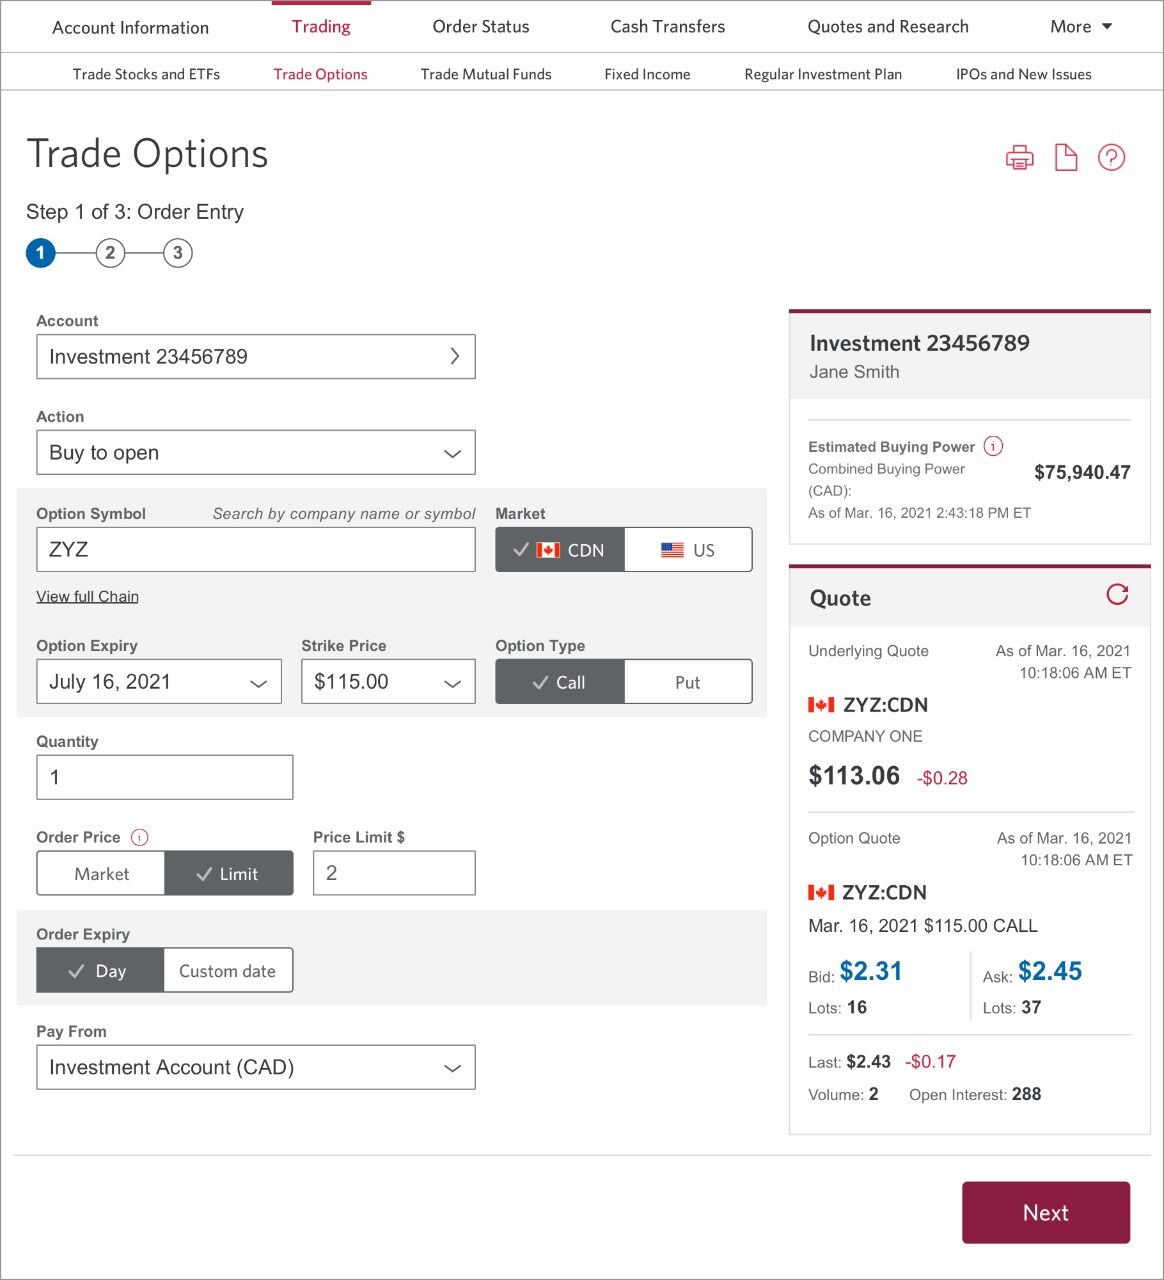 The Trade Options page with the order form filled out.